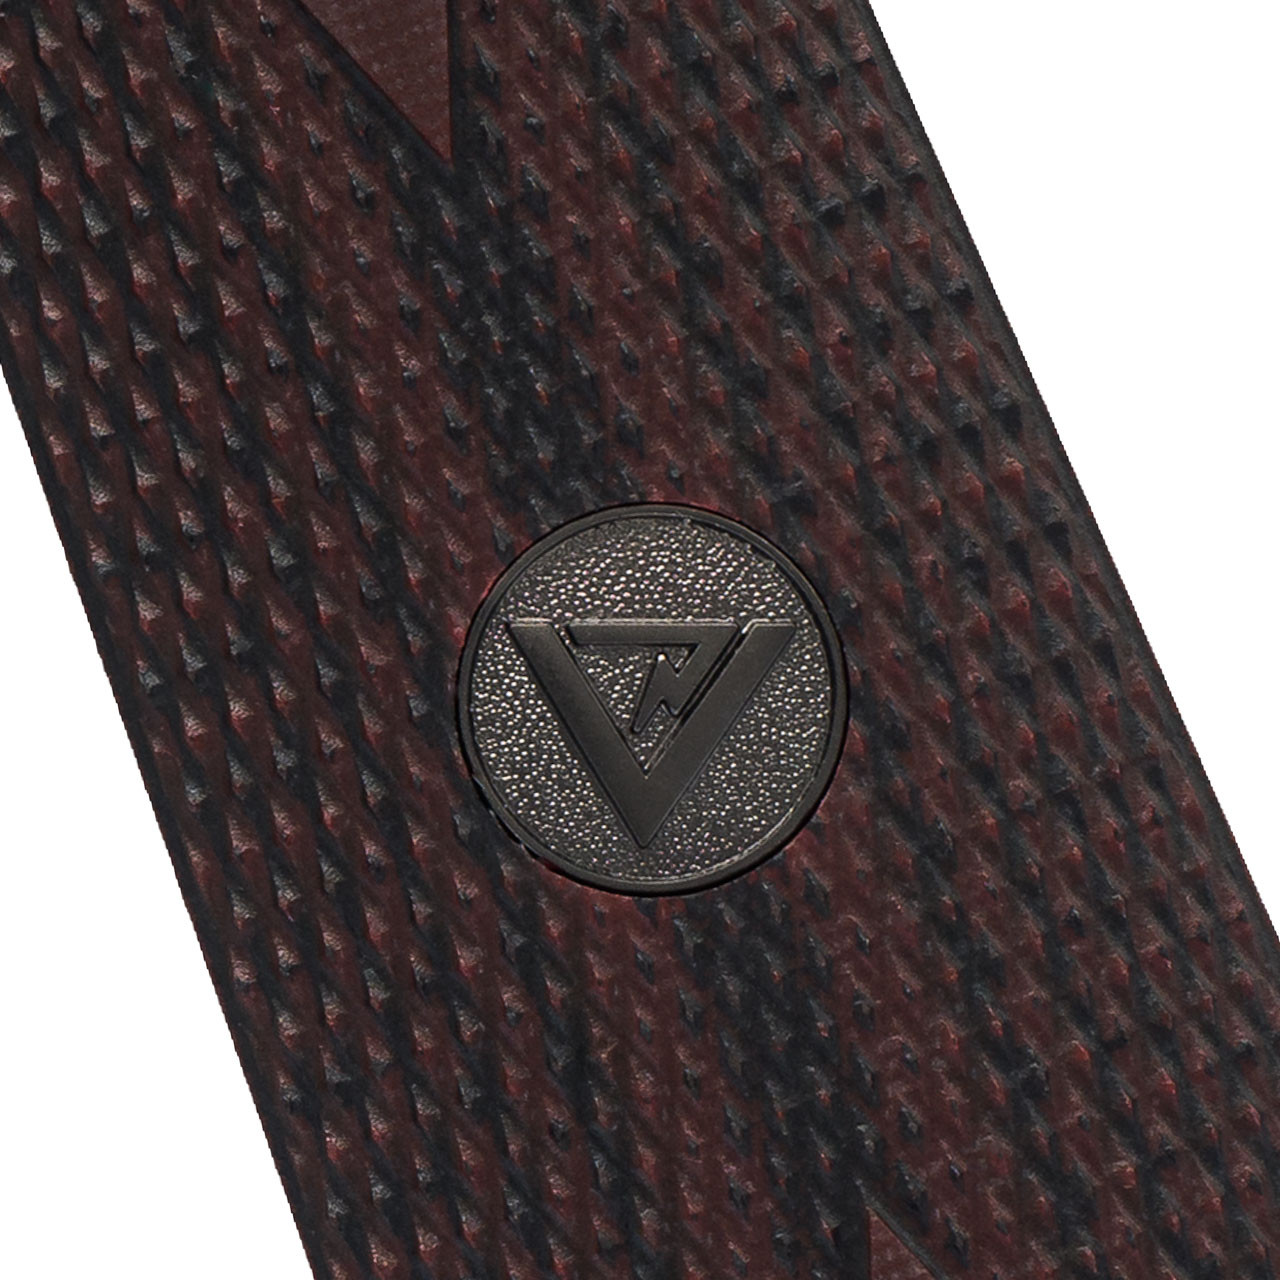 1911 Grips with Vickers Logo on Double Diaomond Texture